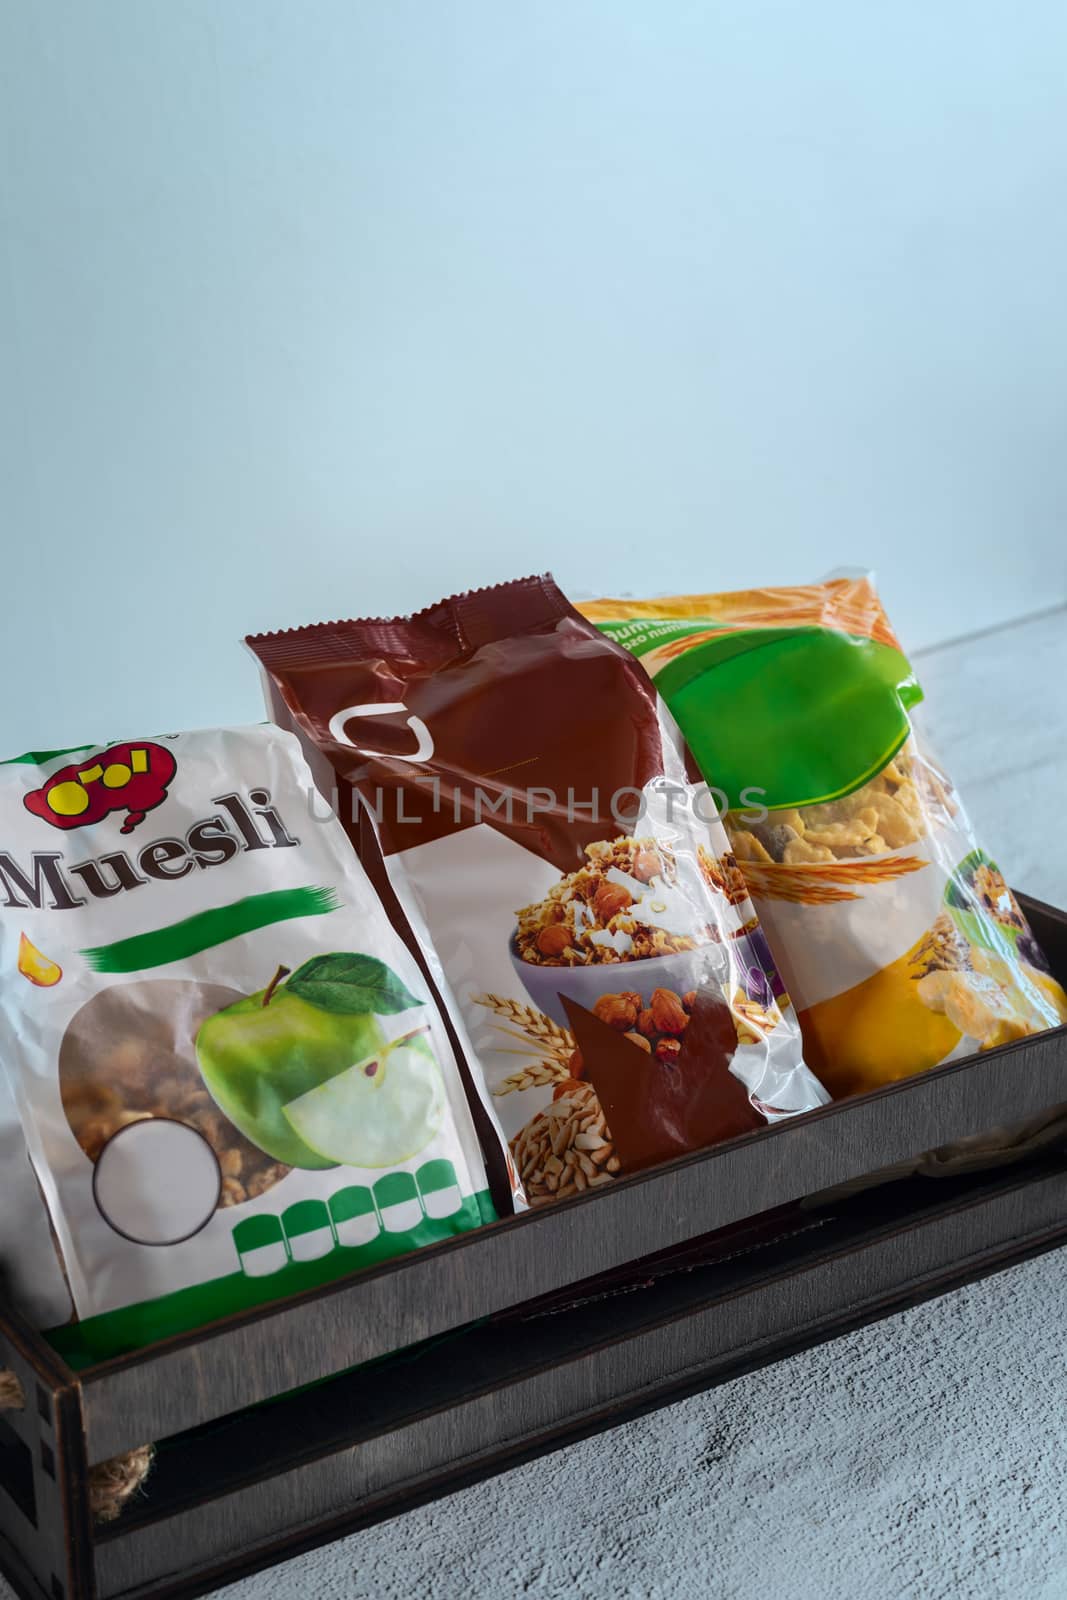 On the table in a wooden container, three packages of muesli in cellophane bags.